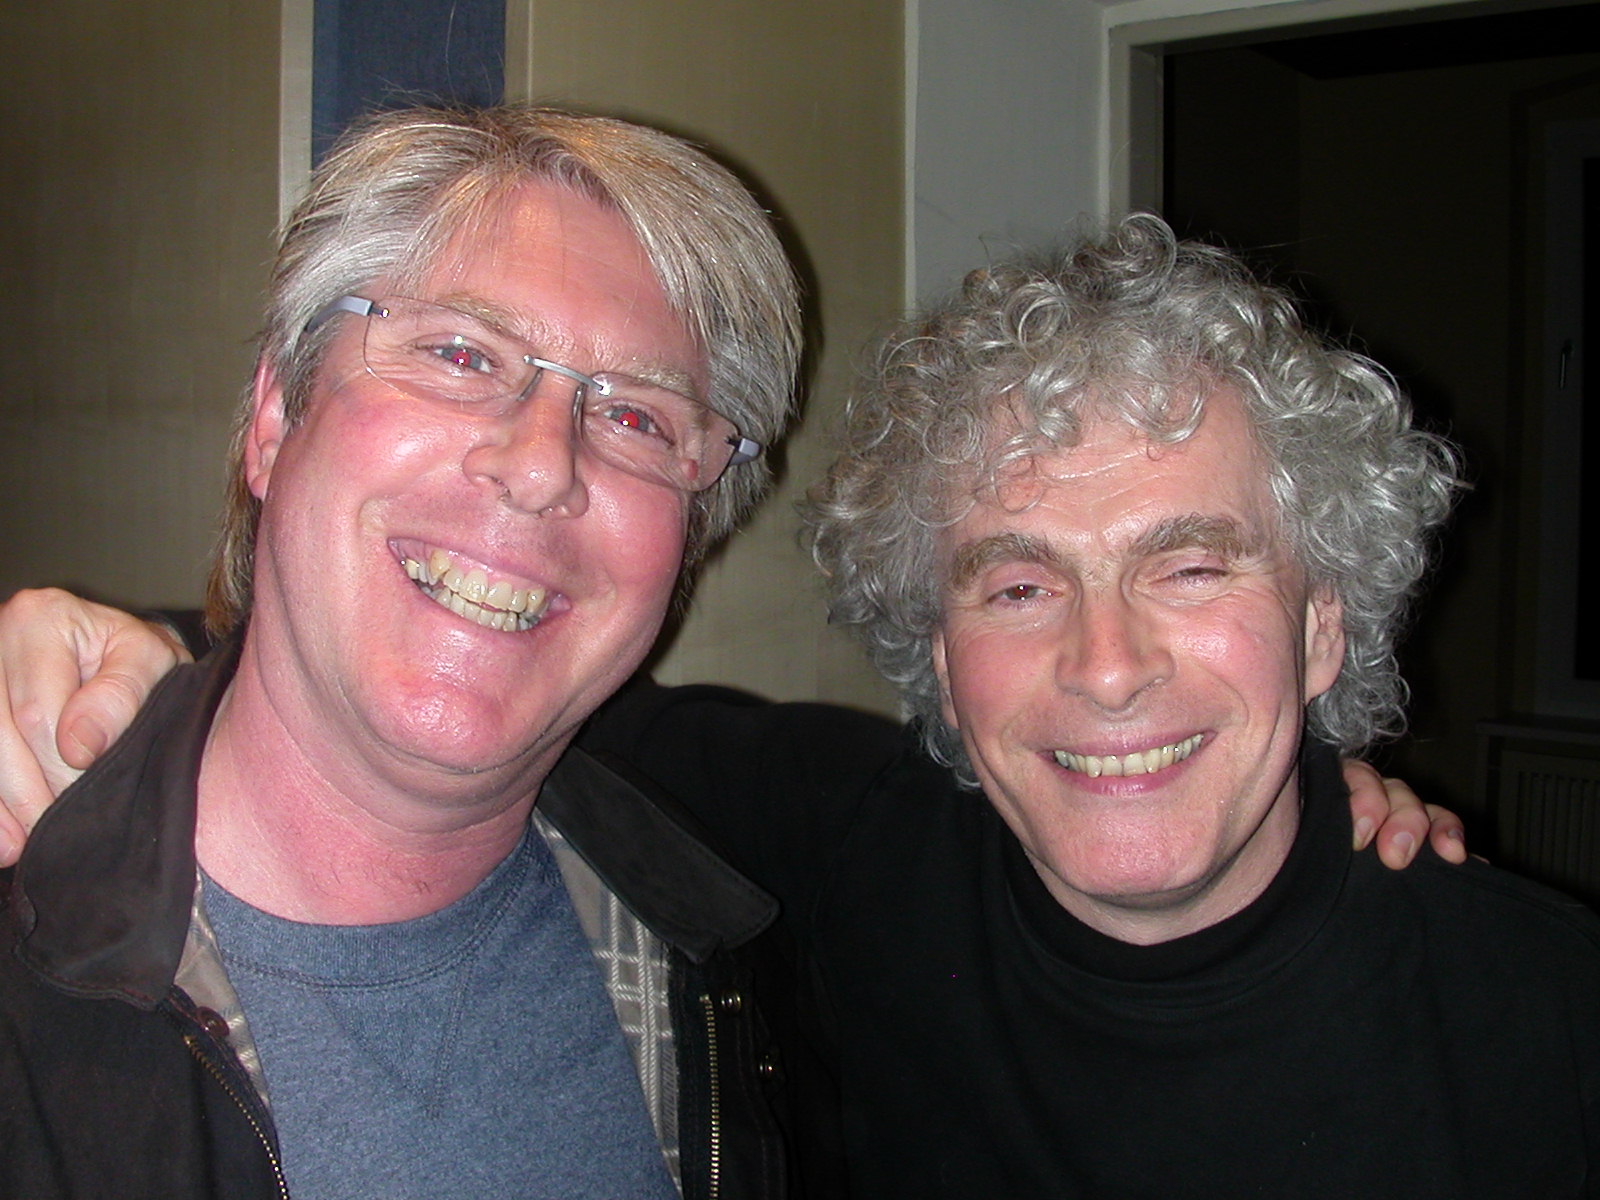 Tommy Lockett and Simon Rattle,Berlin Germany,after Perfume scoring session